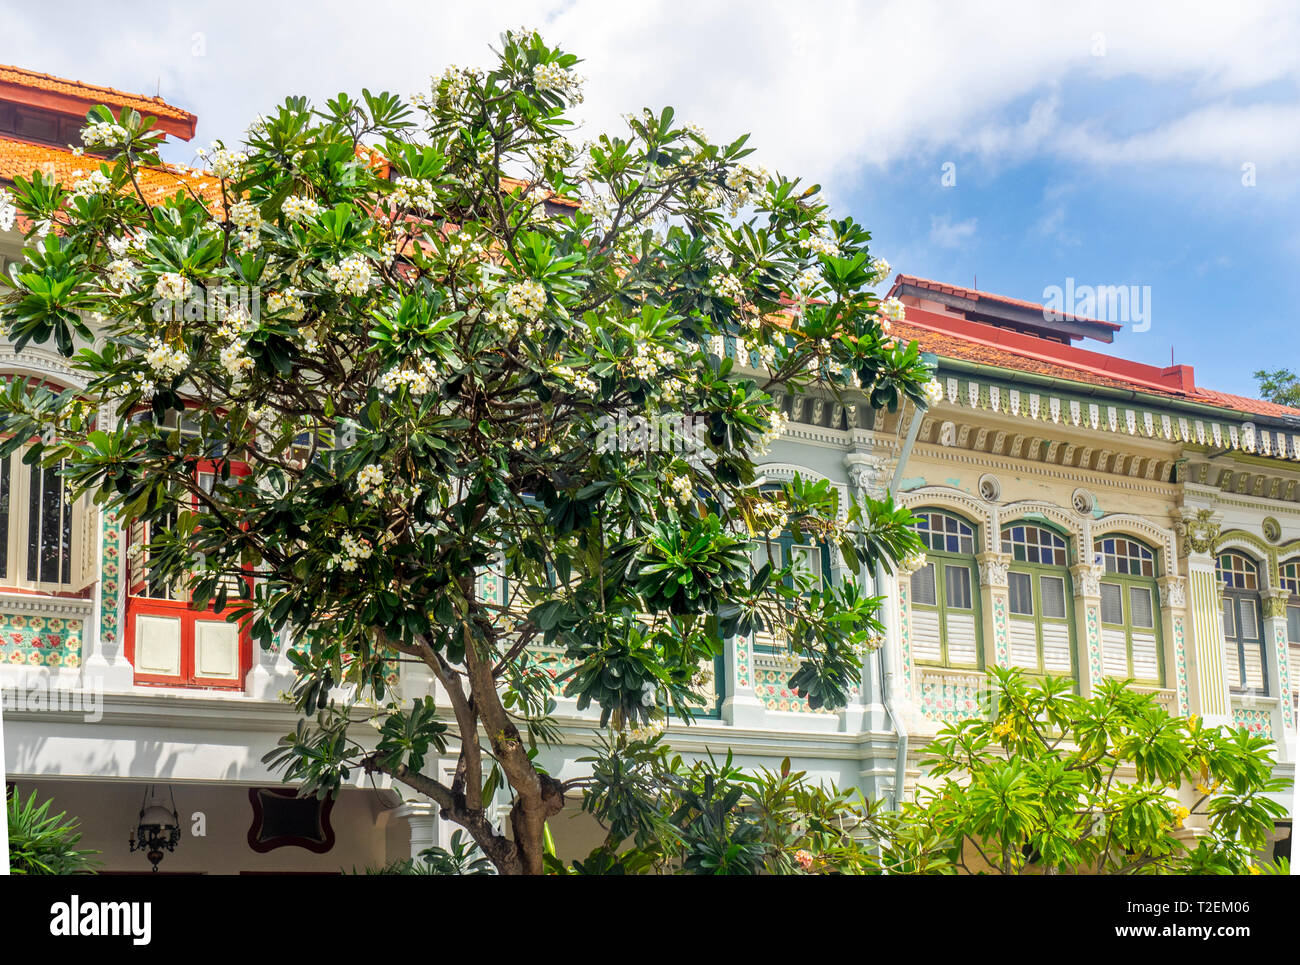 Frangipani tree in garden of Colourful Peranakan terraced houses popular with instagrammers on Koon Seng Road, Joo Chiat,  Geylang, Singapore. Stock Photo